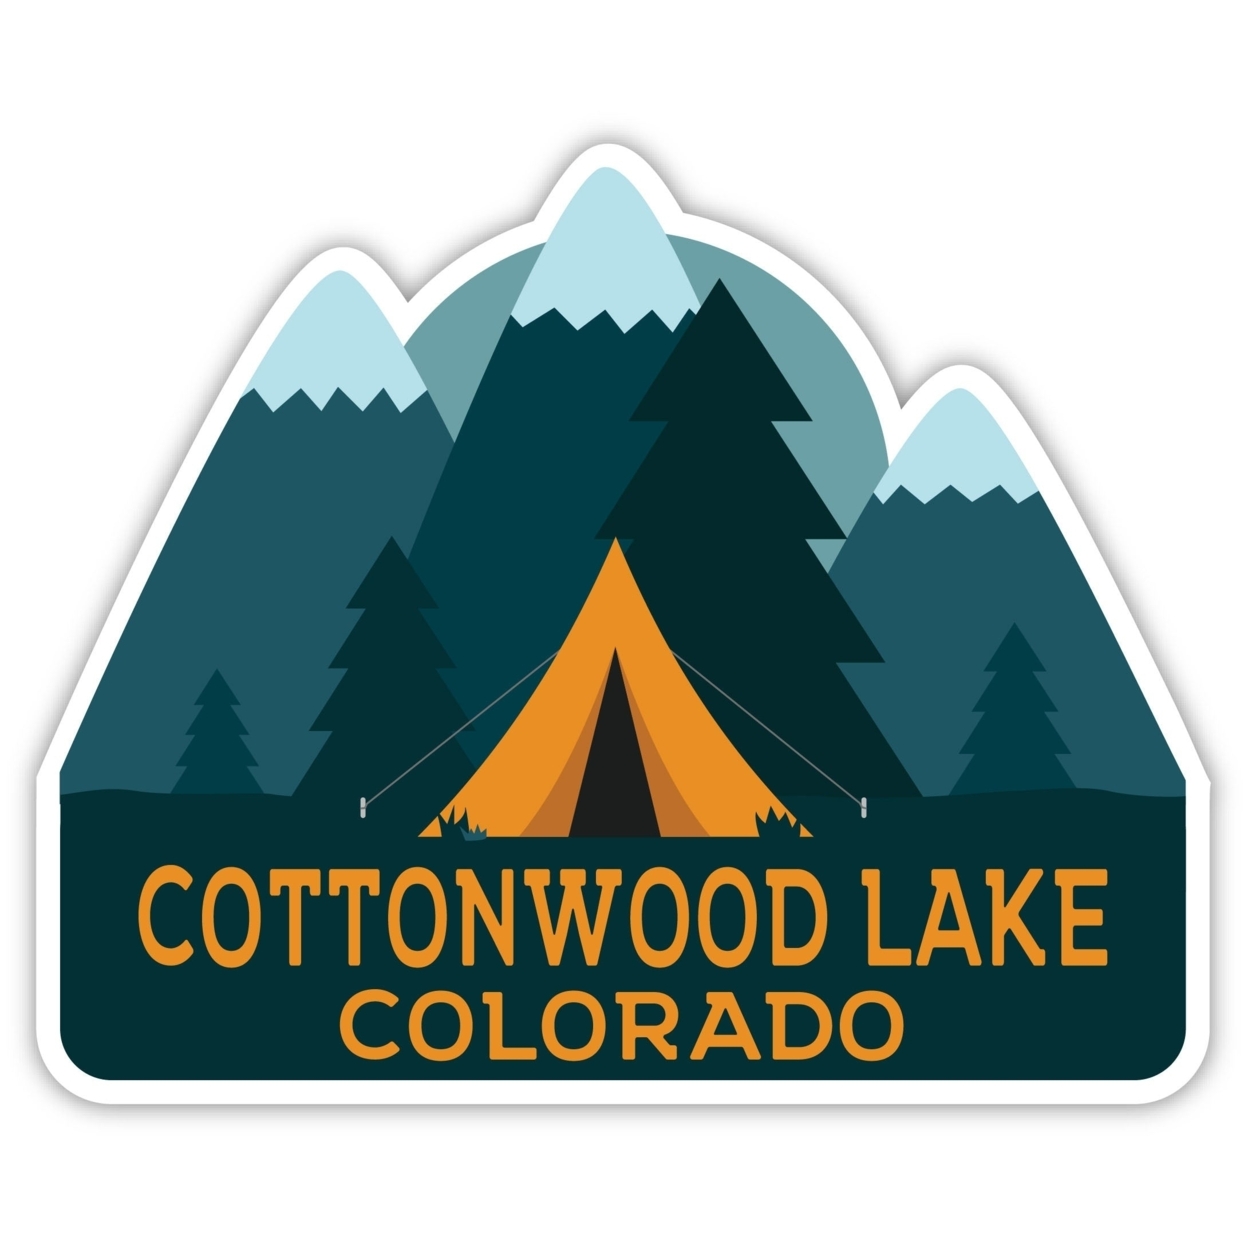 Cottonwood Lake Colorado Souvenir Decorative Stickers (Choose Theme And Size) - 4-Pack, 8-Inch, Great Outdoors